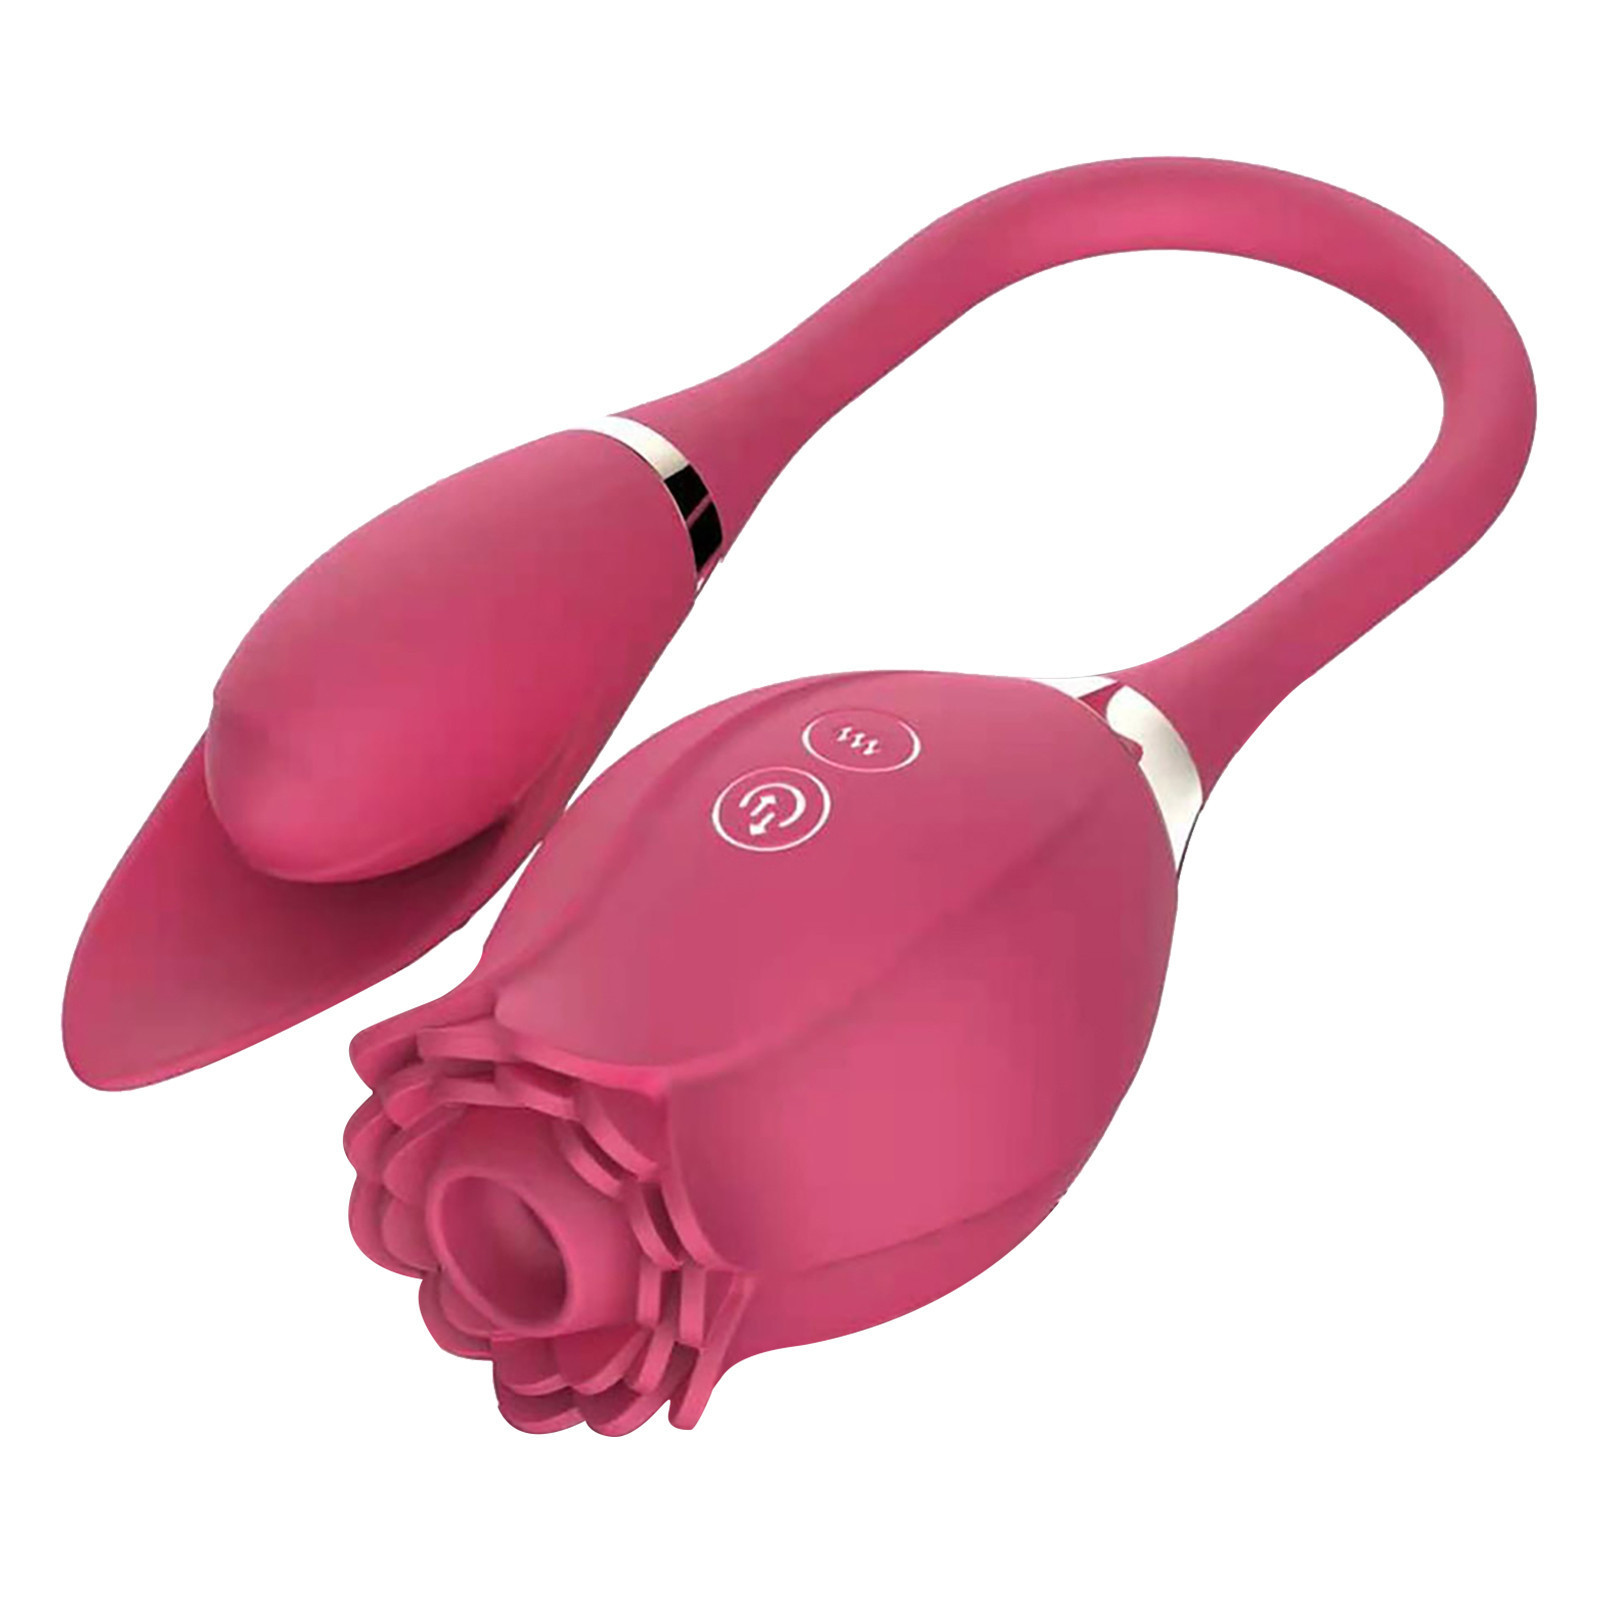 Wild Lady Tongue Licking and Rose Toy for Women-Lovevib